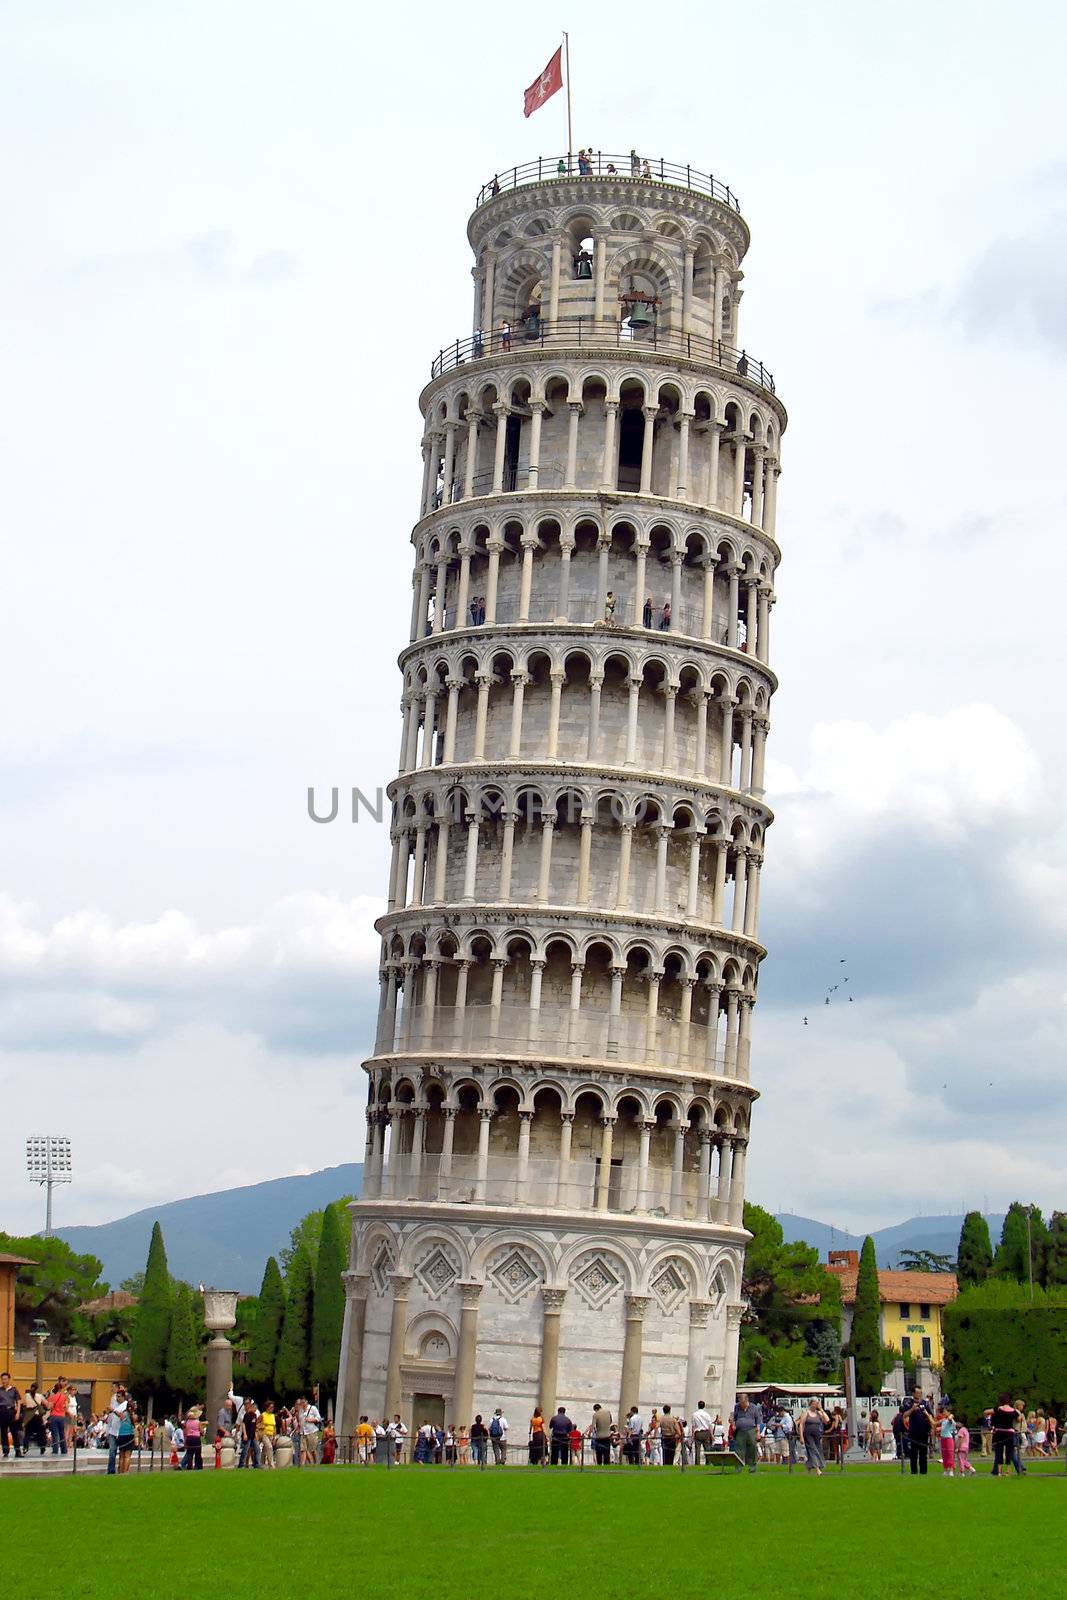 the famous Pisa leaning tower in Italy